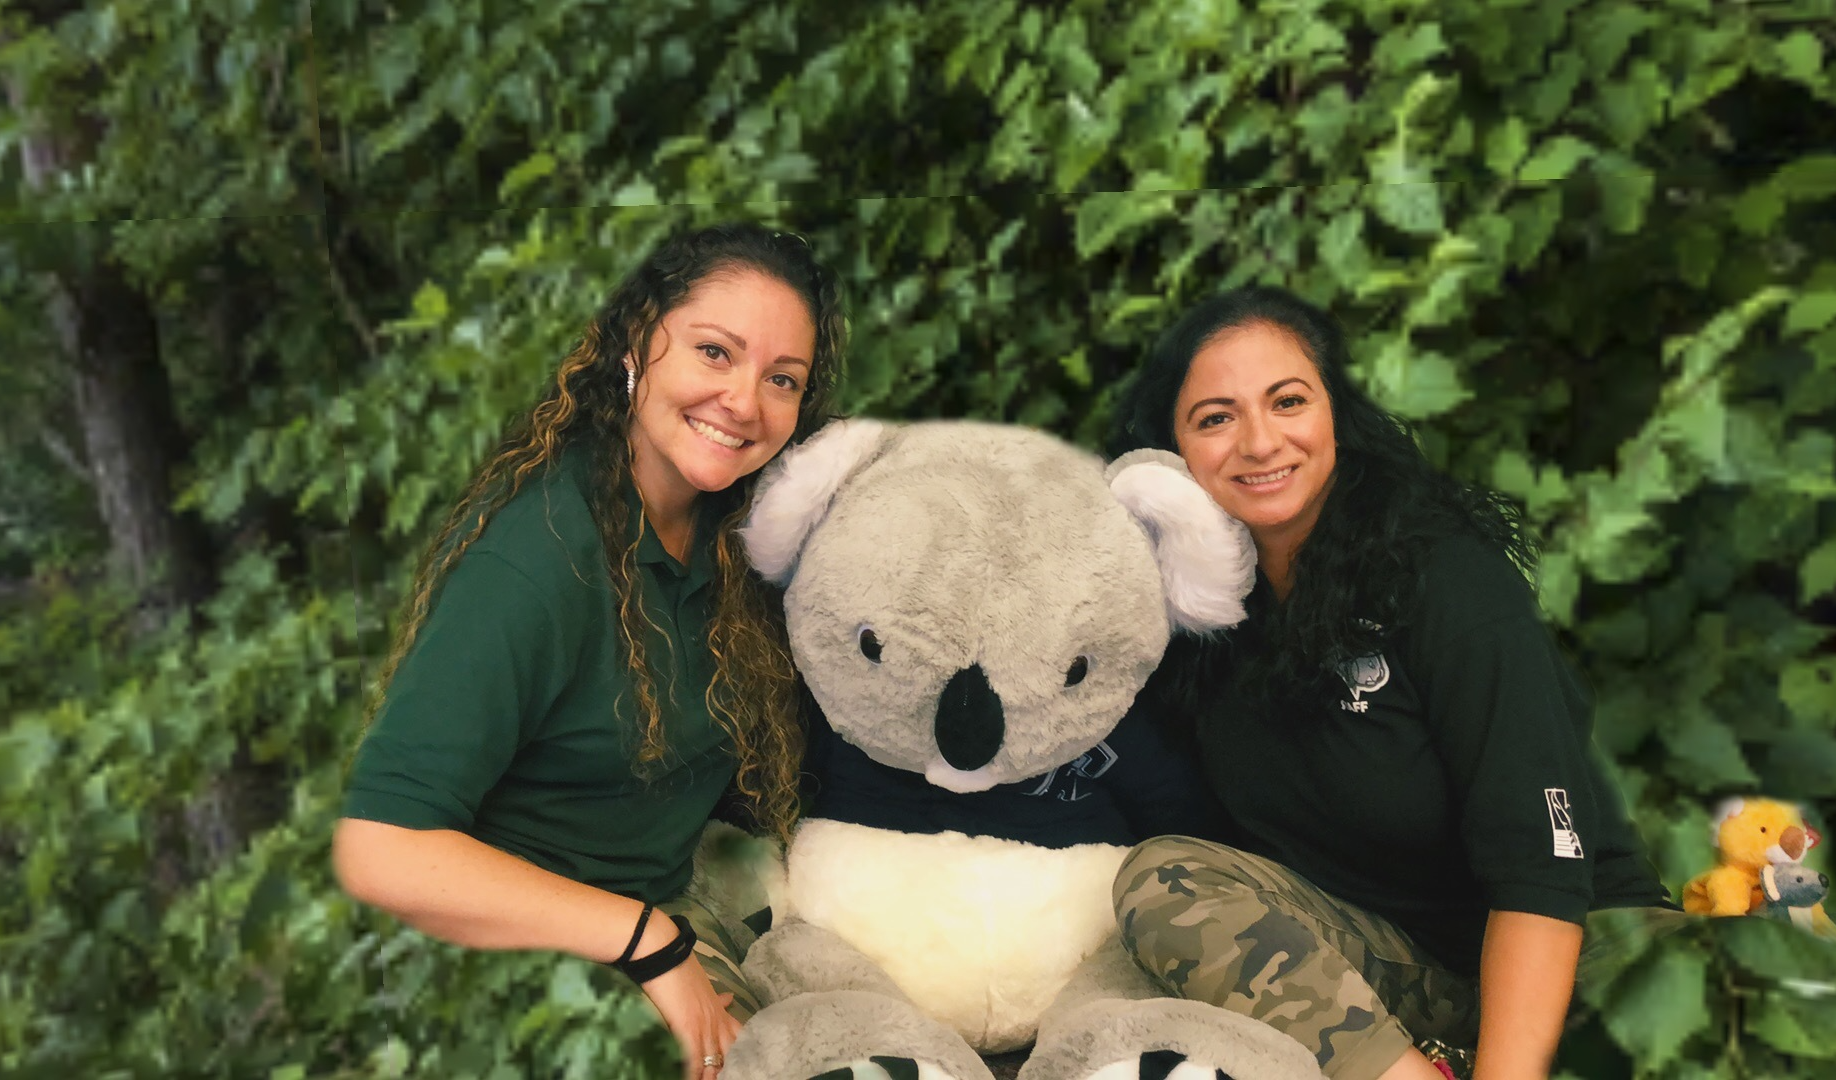 Office ladies Jennifer and Nancy hanging out with our giant koala.